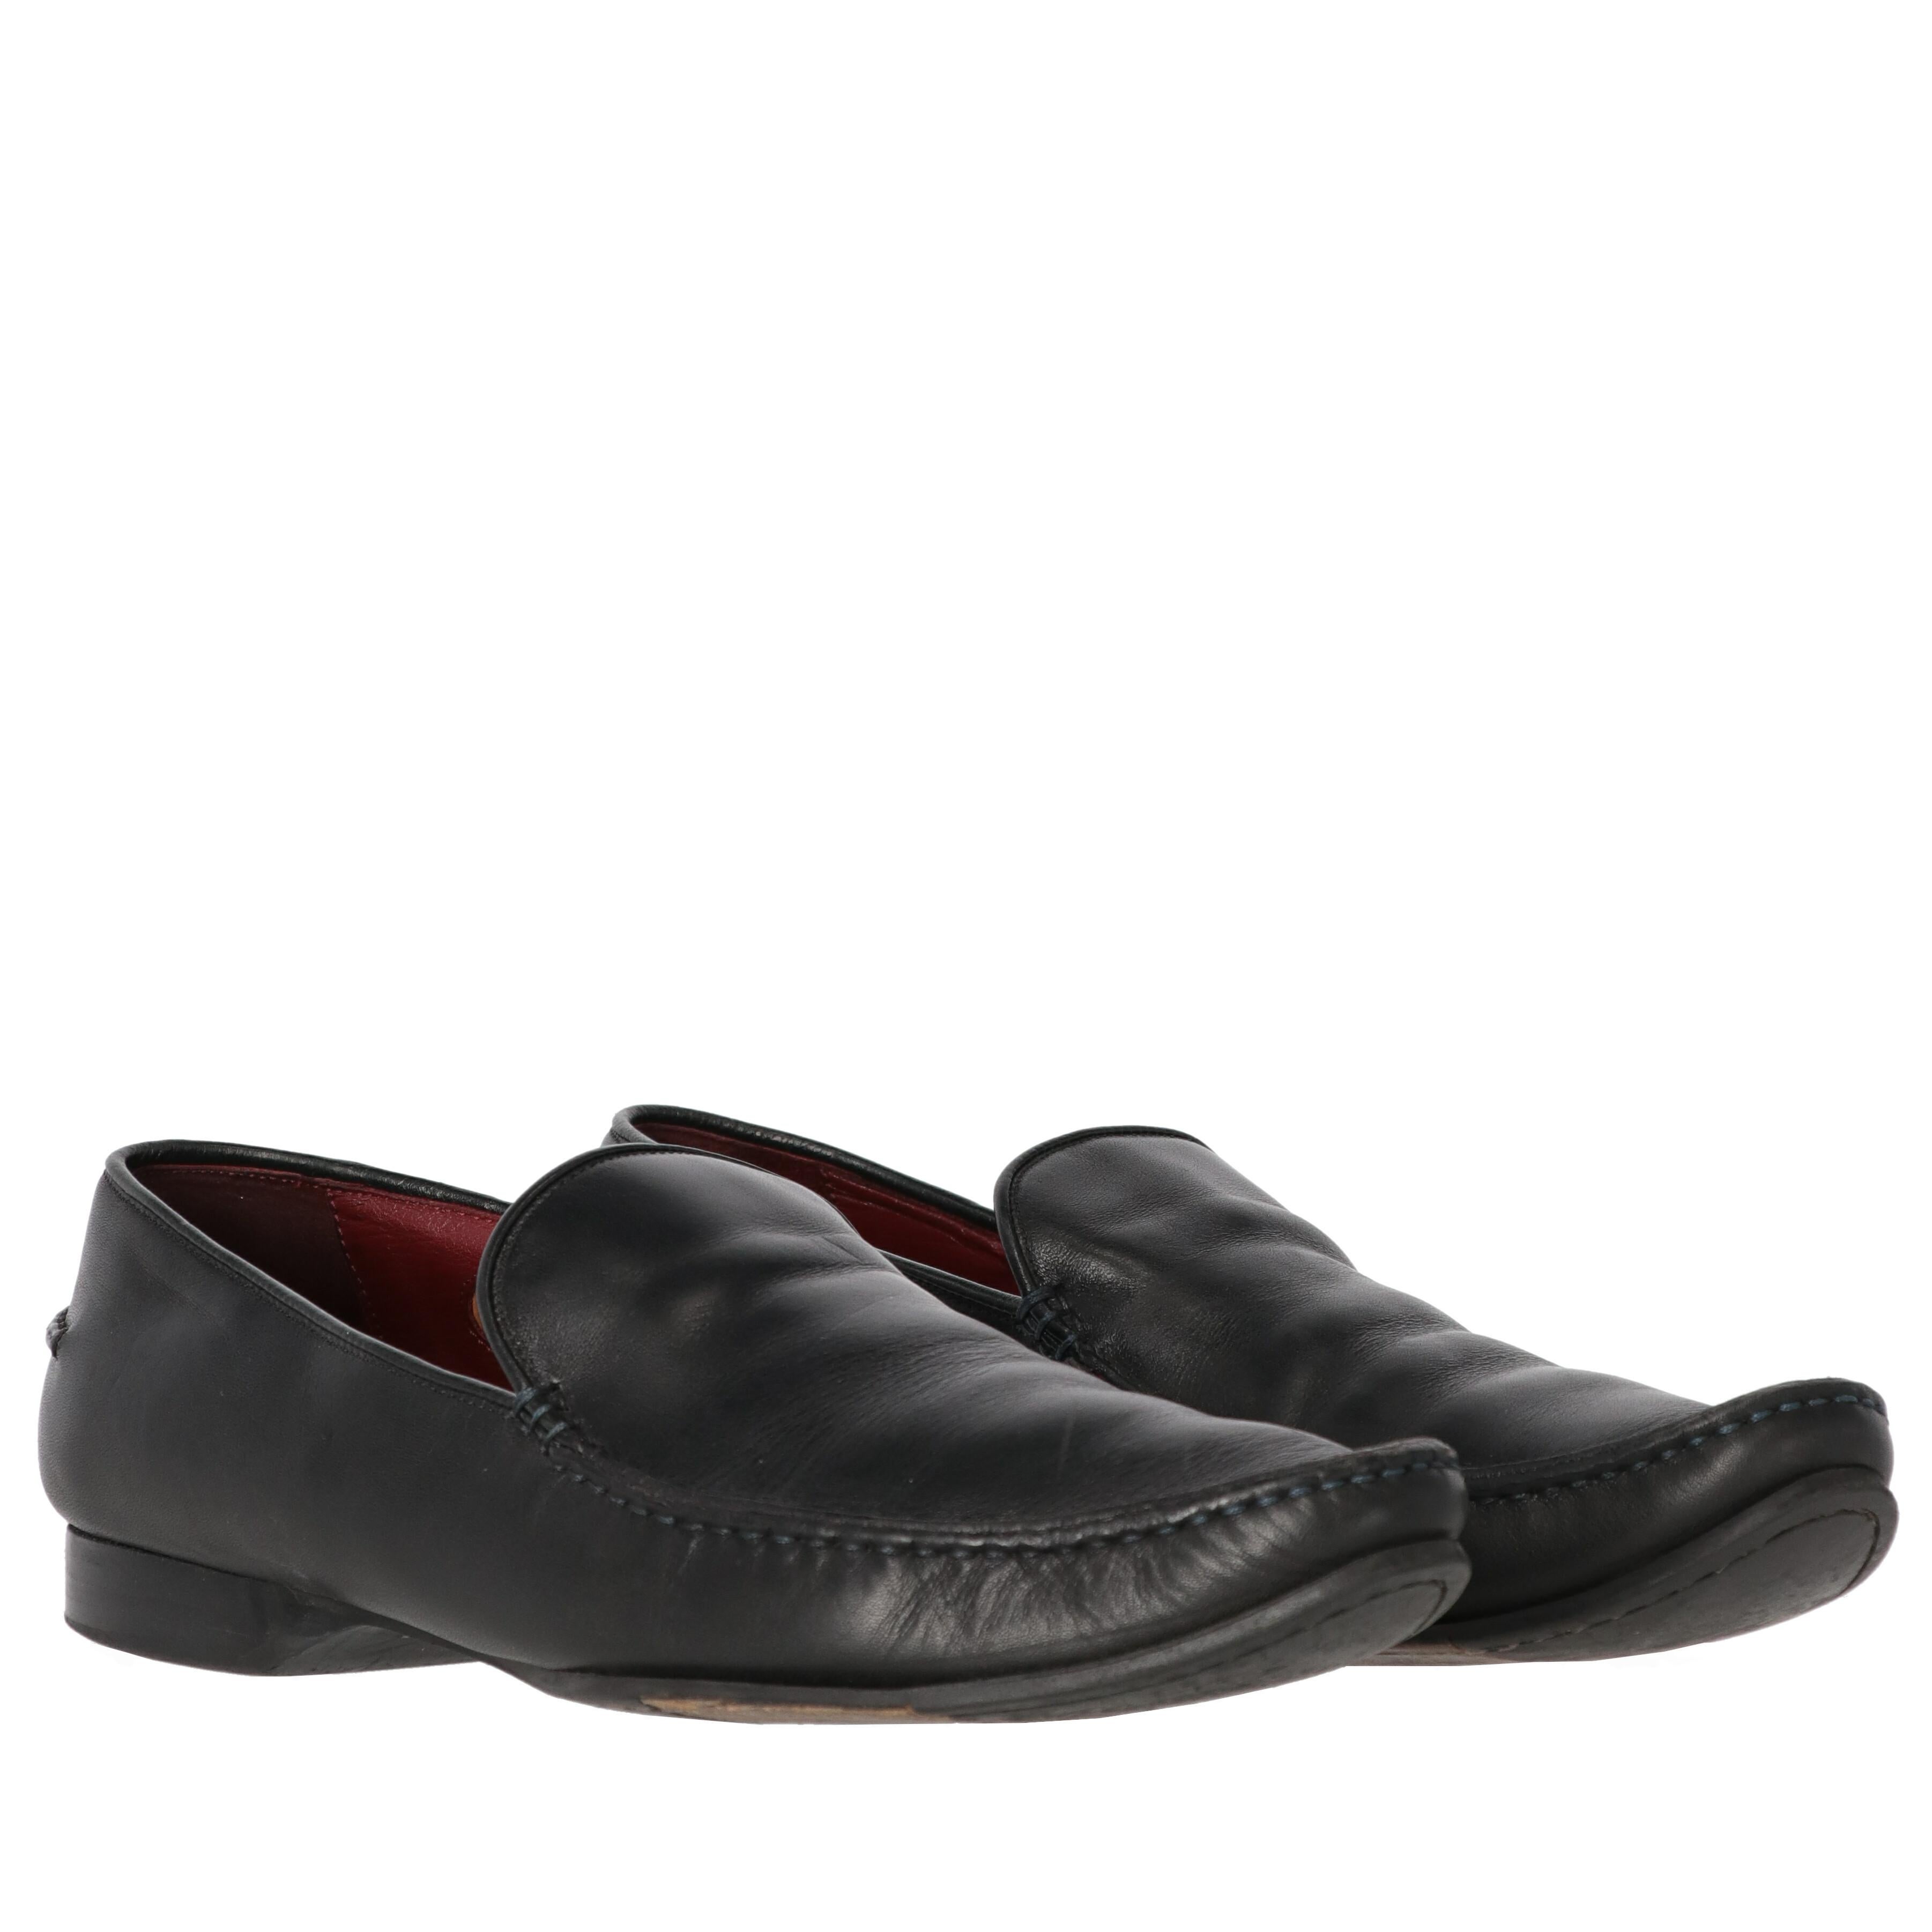 2000s Gianfranco Ferré Black Leather Loafers In Good Condition For Sale In Lugo (RA), IT